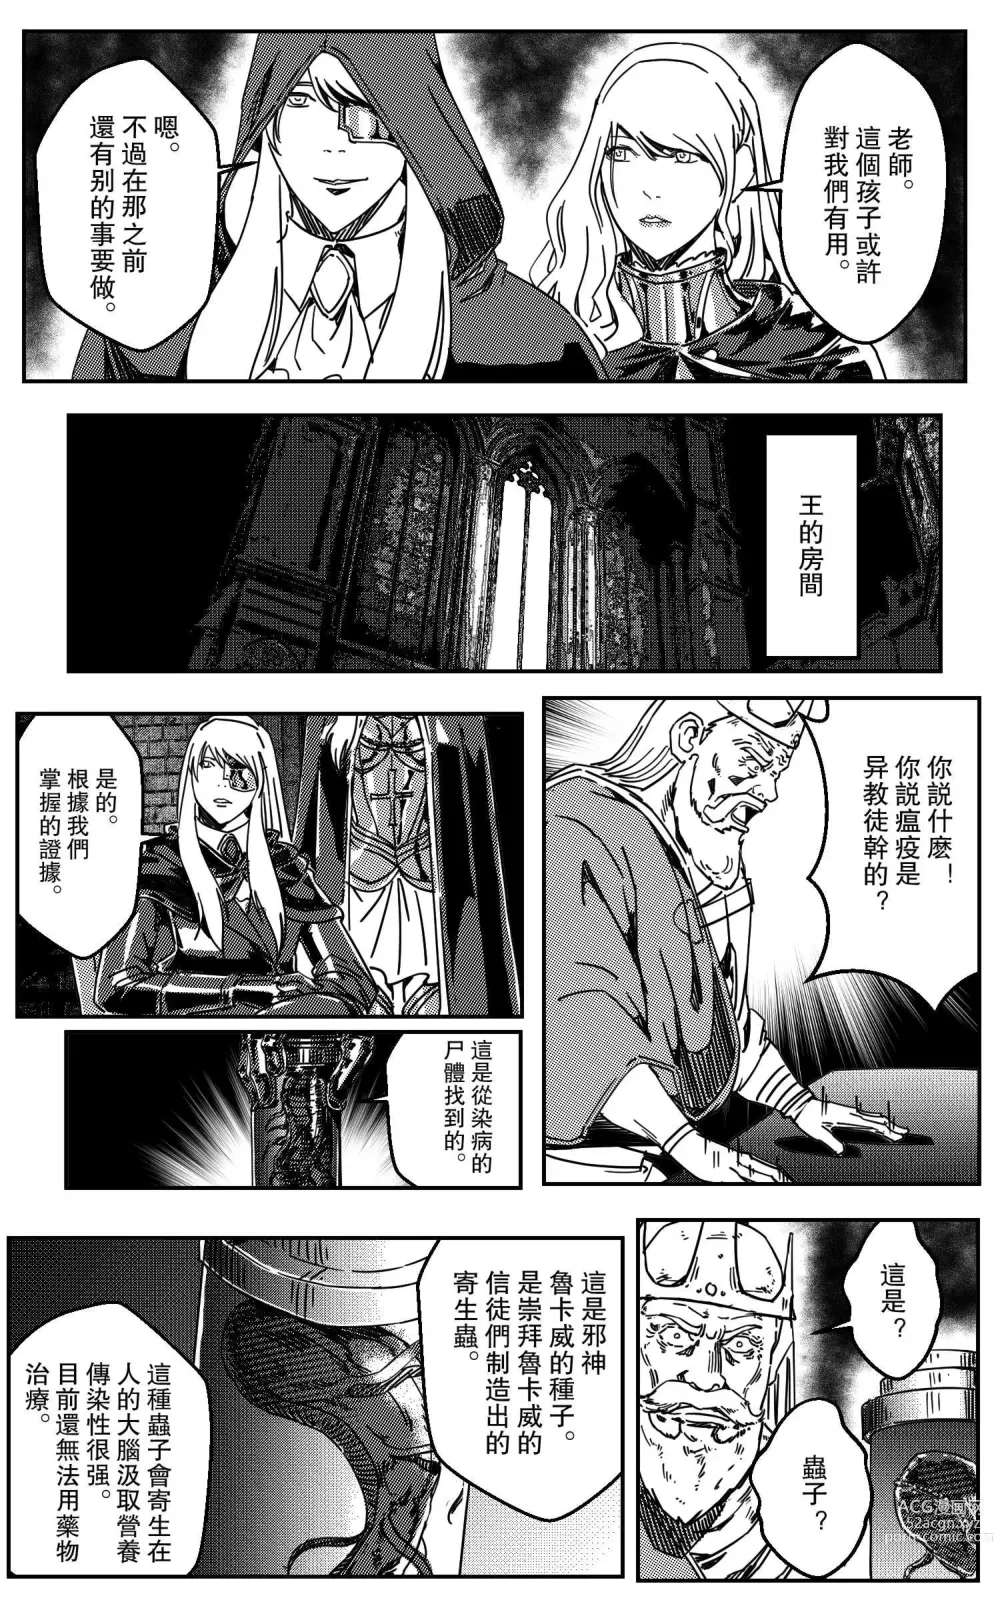 Page 8 of doujinshi 鉄處女/Ironmaiden 01-03（已腰斬）